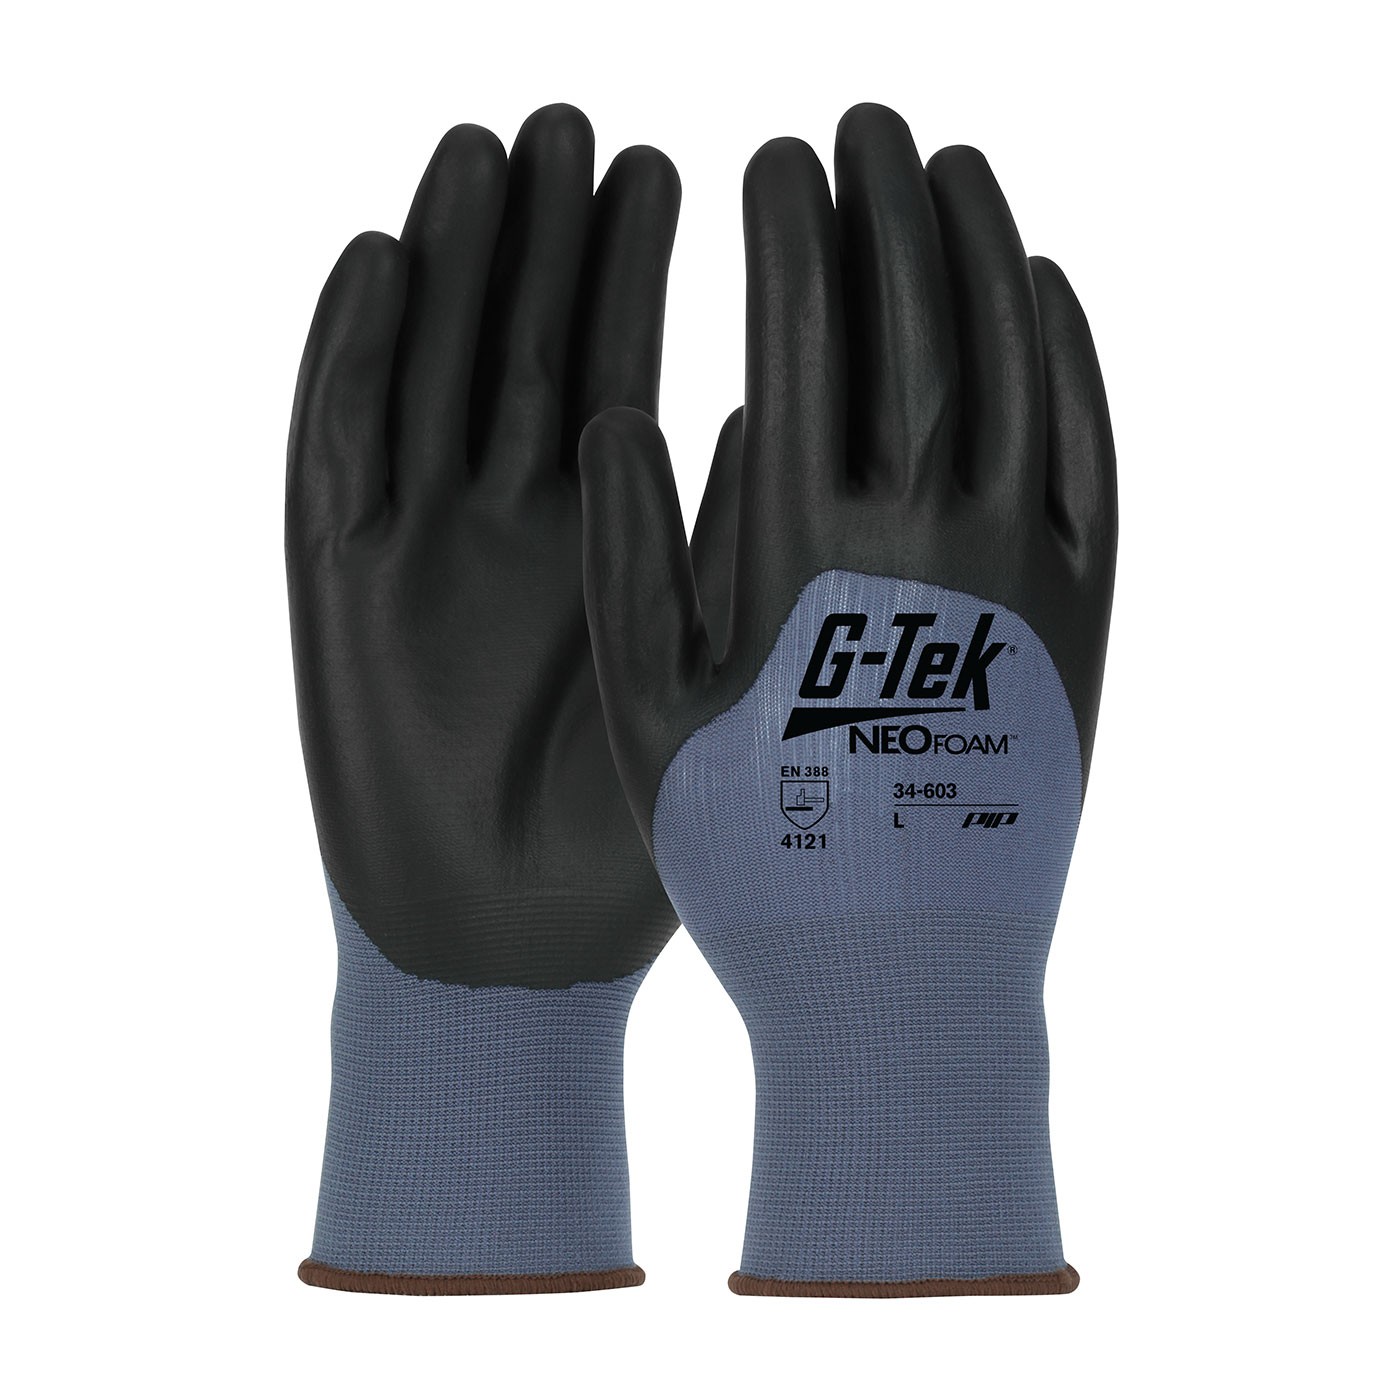  G-Tek® NeoFoam® Seamless Nylon Glove with NeoFoam® Coated Palm, Fingers & Knuckles - Touchscreen Compatible (#34-603)